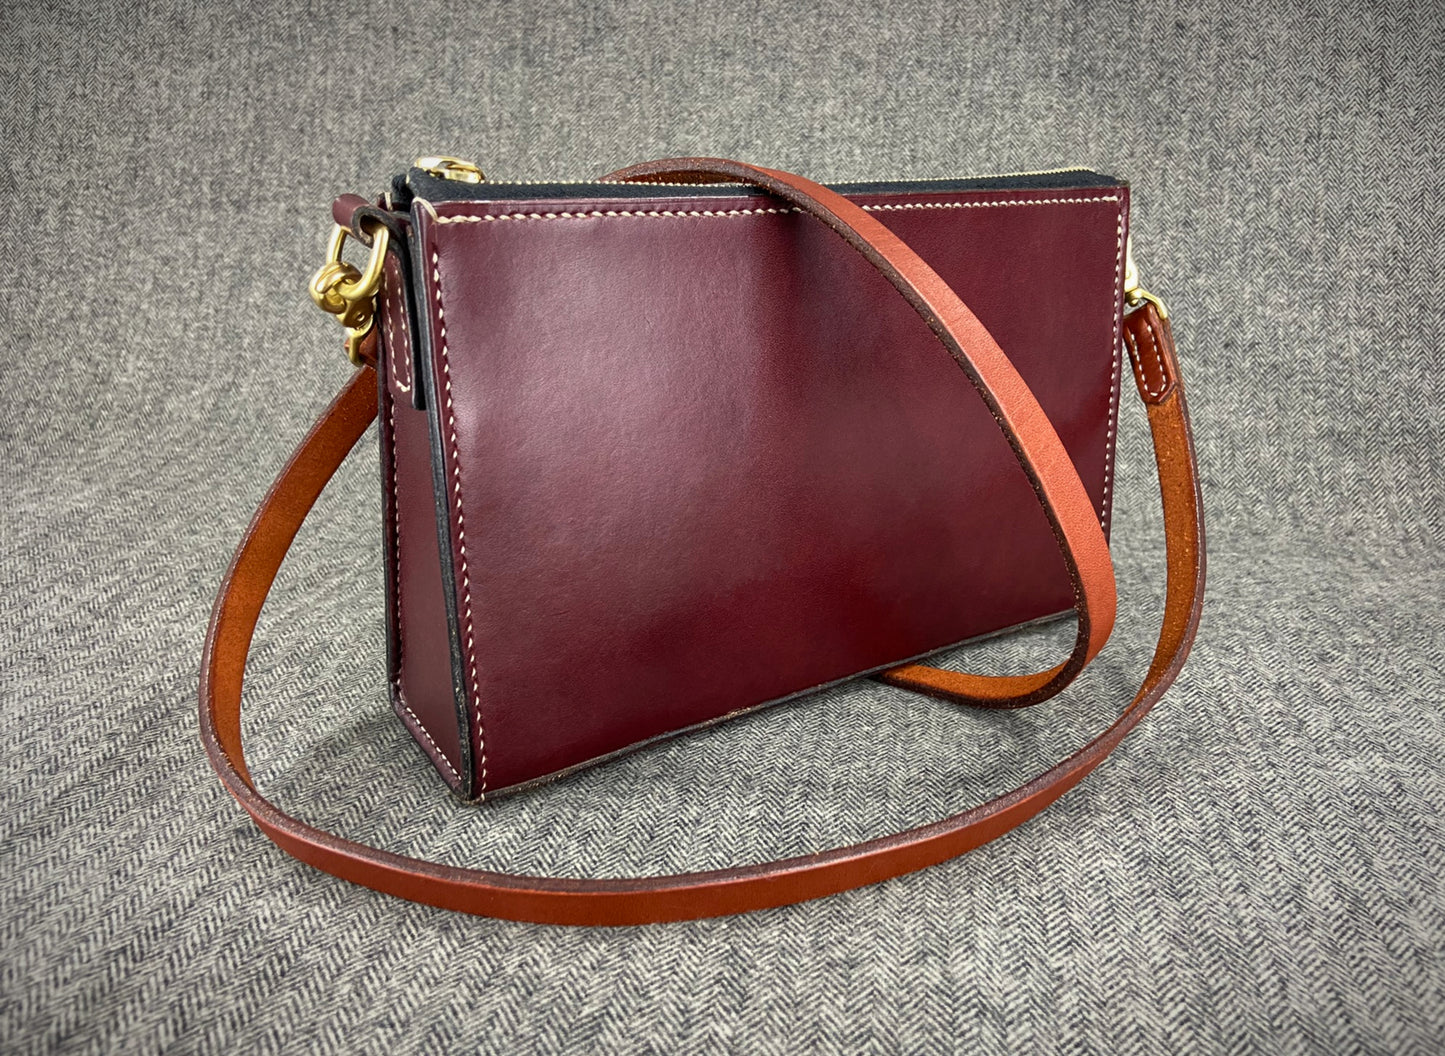 Handcrafted full grain vegatable leather handbag made in New Hampshire, USA. Fully lined with full grain vegatable tanned leather, solid brass hardware, 100% hand stitched, Riri zipper.